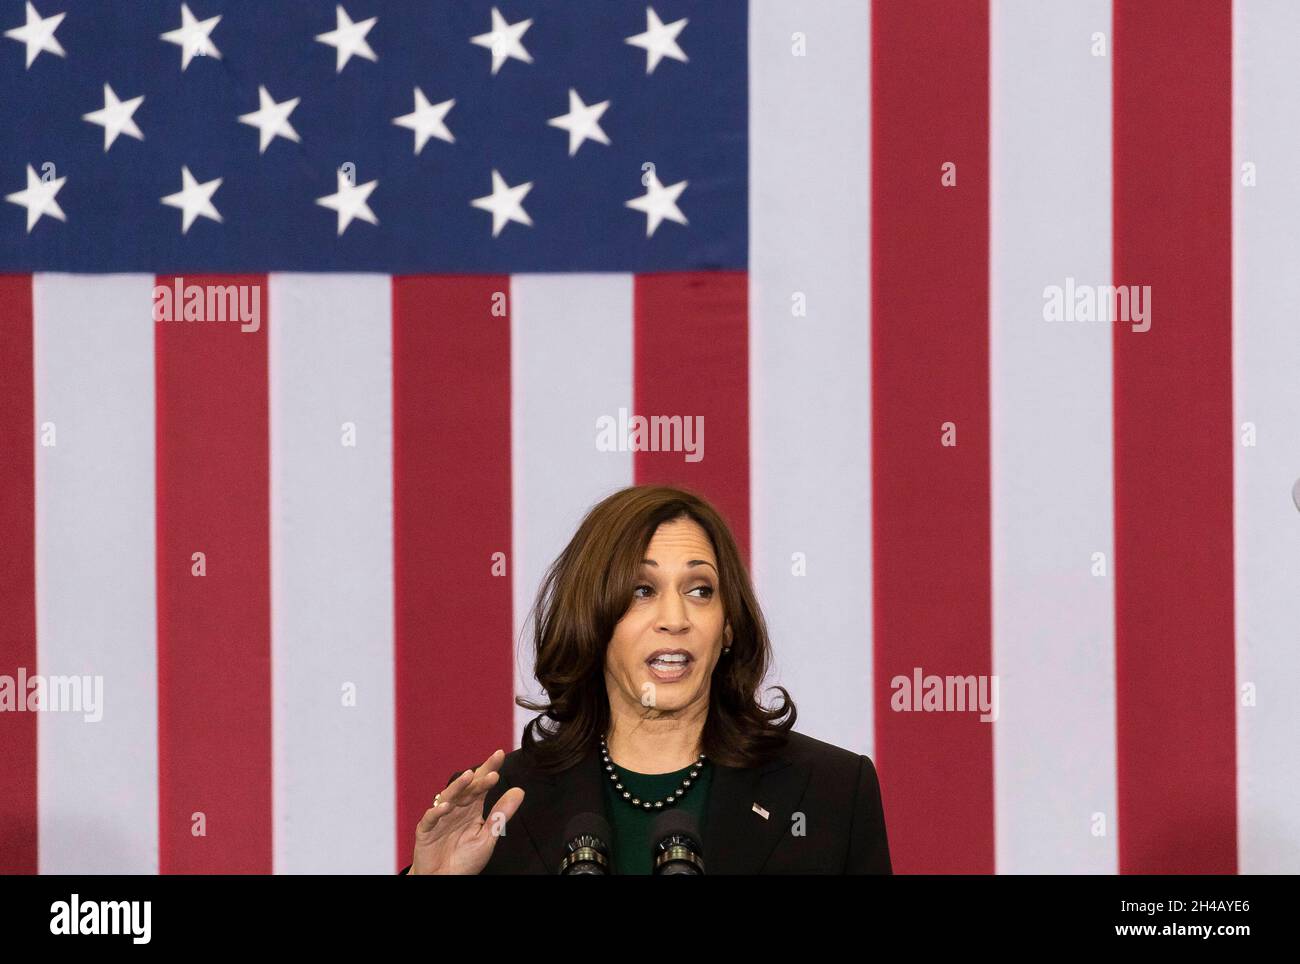 New York, New York, USA. 01st Nov, 2021. United States Vice President Kamala Harris speaks at an event promoting the Biden administrations Build Back Better agenda and and clean energy solutions in a Port Authority of New York and New Jersey hangar at John F. Kennedy International airport in the Queens borough of New York, New York, USA, 01 November 2021. Credit: Justin Lane/Pool via CNP/dpa/Alamy Live News Stock Photo